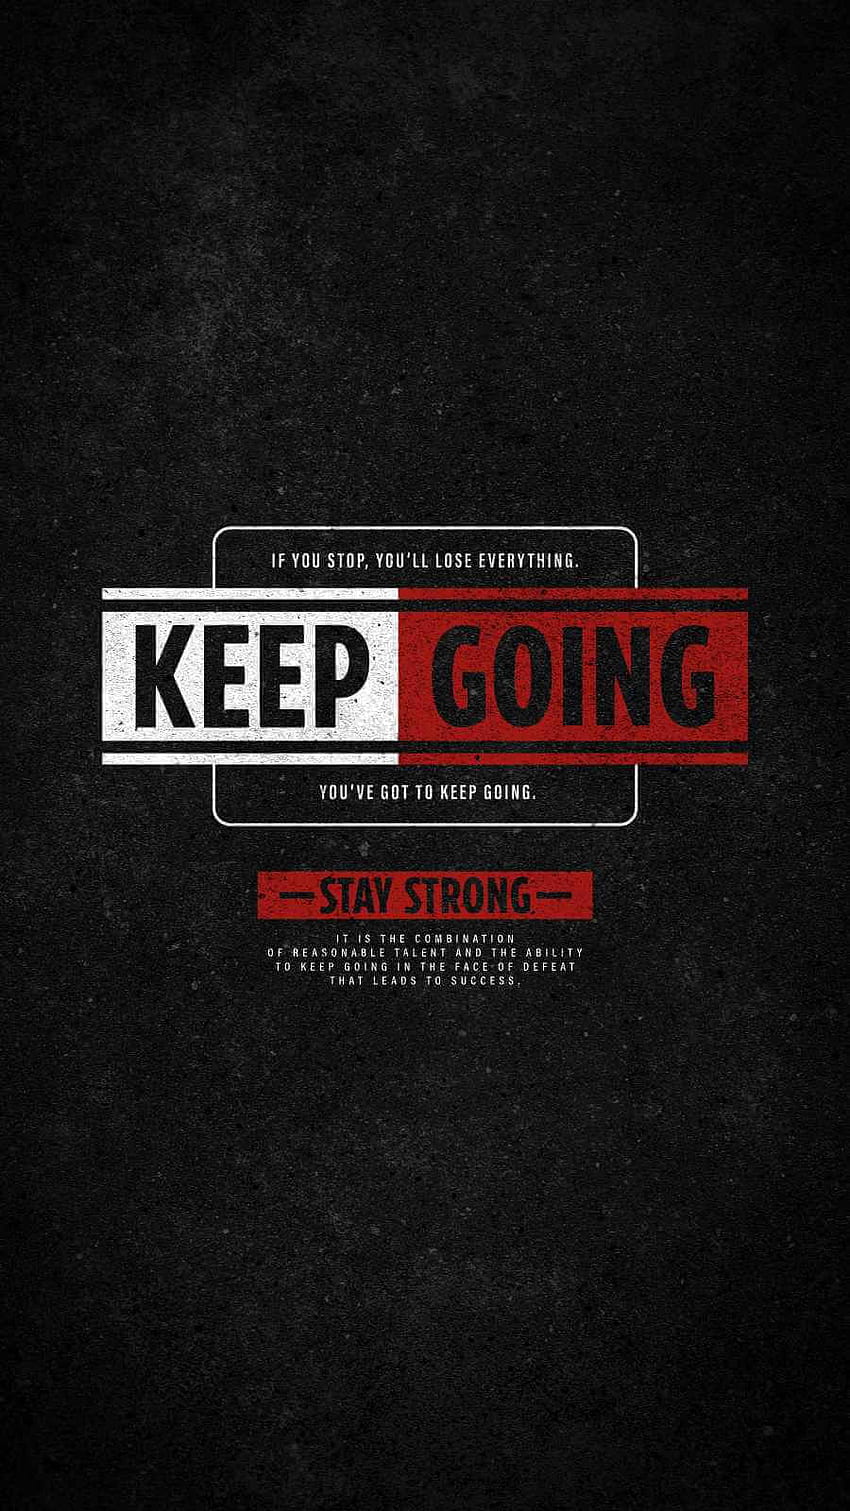 Best Quote Keep Going iPhone - Update, Best iPhone and iPhone background : Update, Best iPhone and iPhone background, GOT Quotes HD phone wallpaper